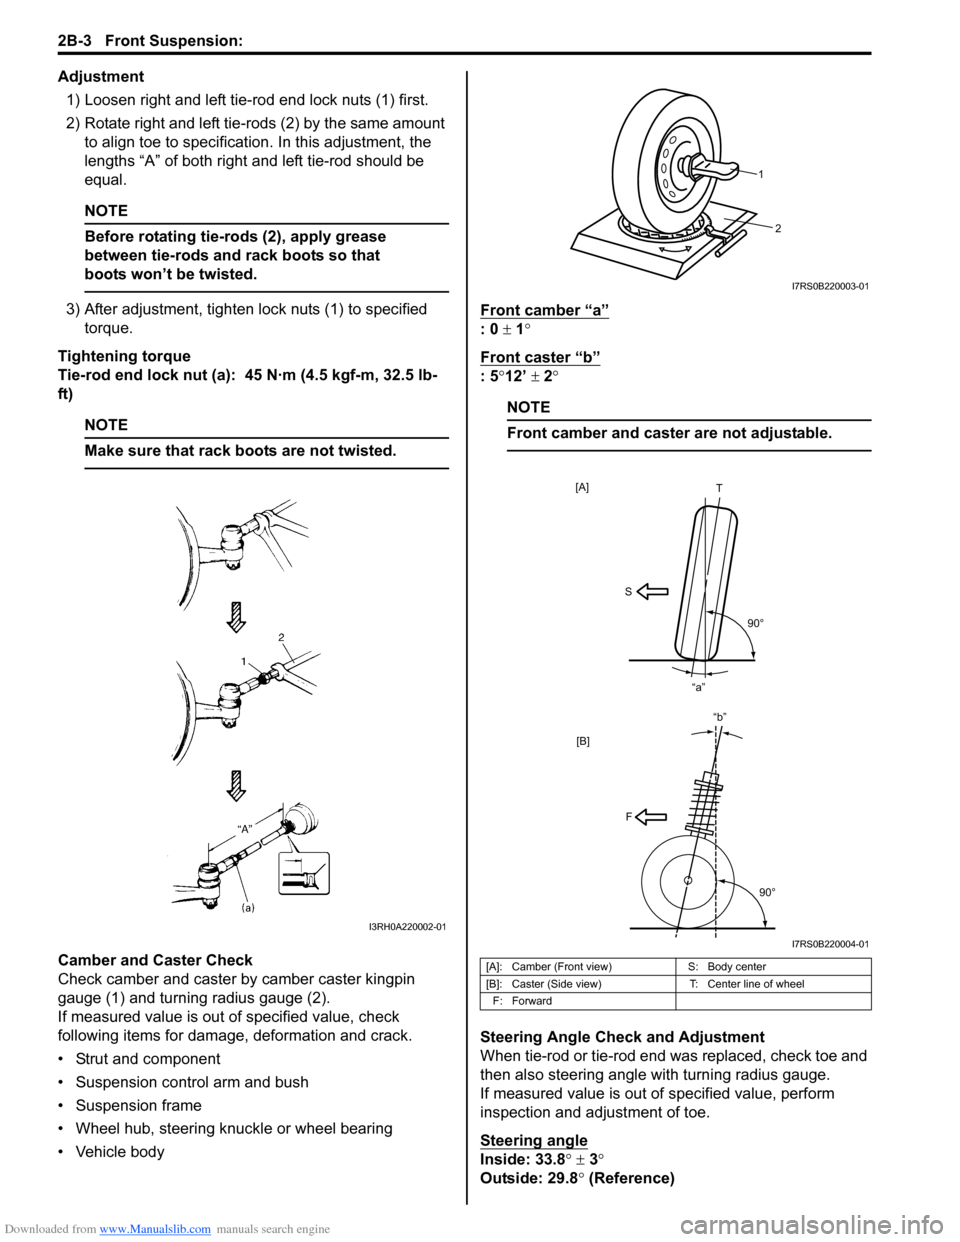 SUZUKI SWIFT 2008 2.G Service Workshop Manual Downloaded from www.Manualslib.com manuals search engine 2B-3 Front Suspension: 
Adjustment1) Loosen right and left tie-rod end lock nuts (1) first.
2) Rotate right and left tie-rods (2) by the same a